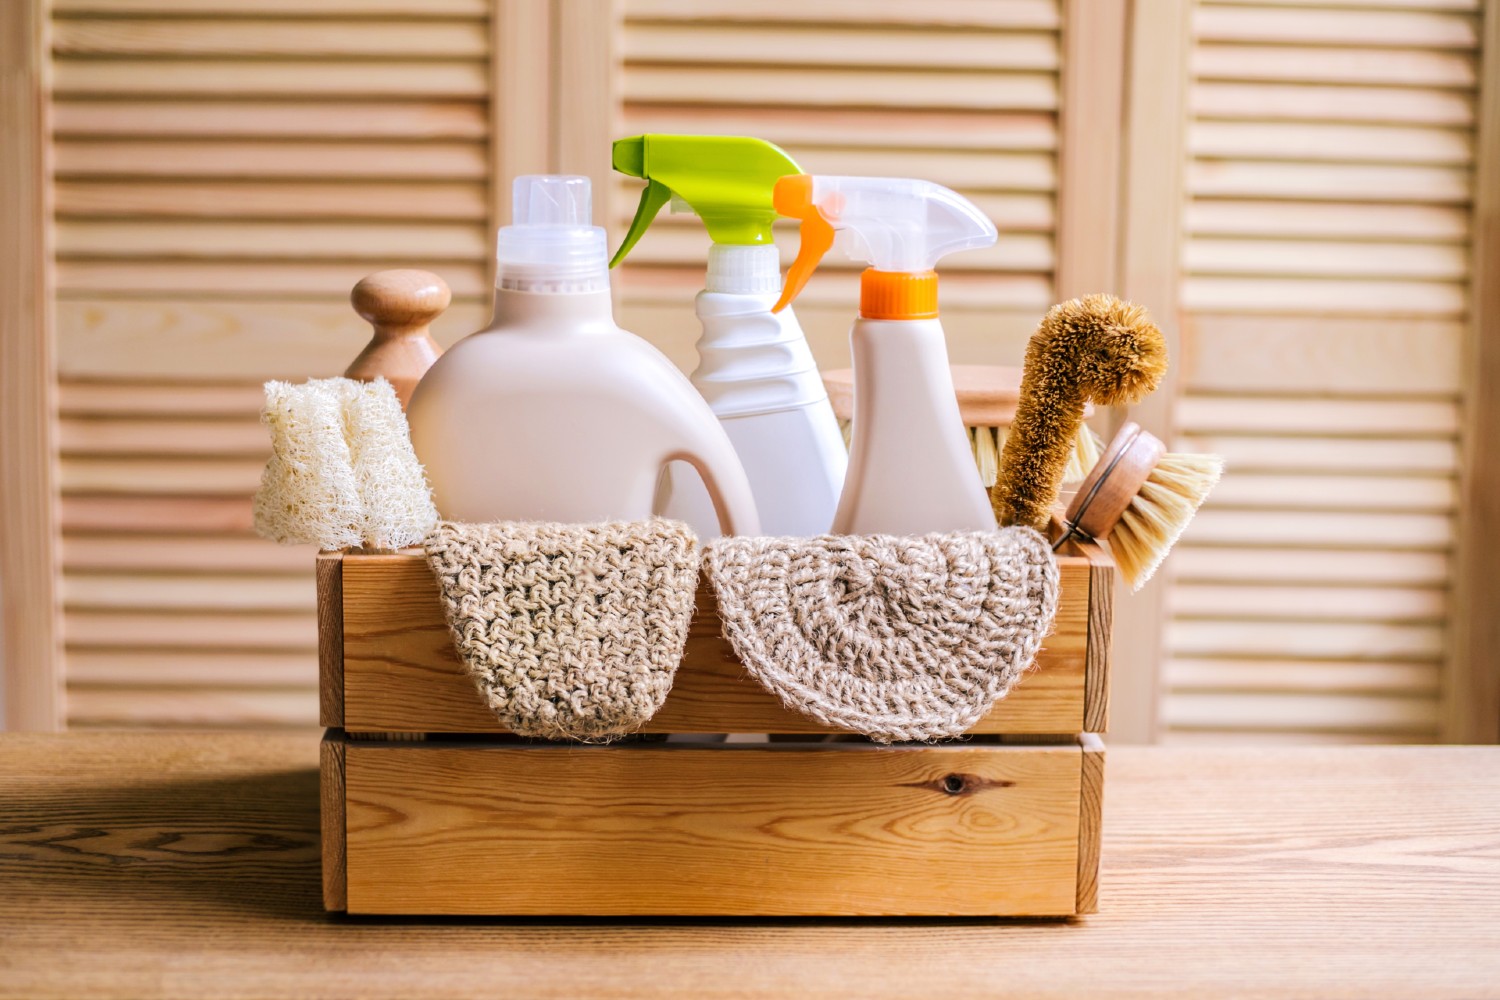 Do Natural Cleaning Products Kill Bacteria?